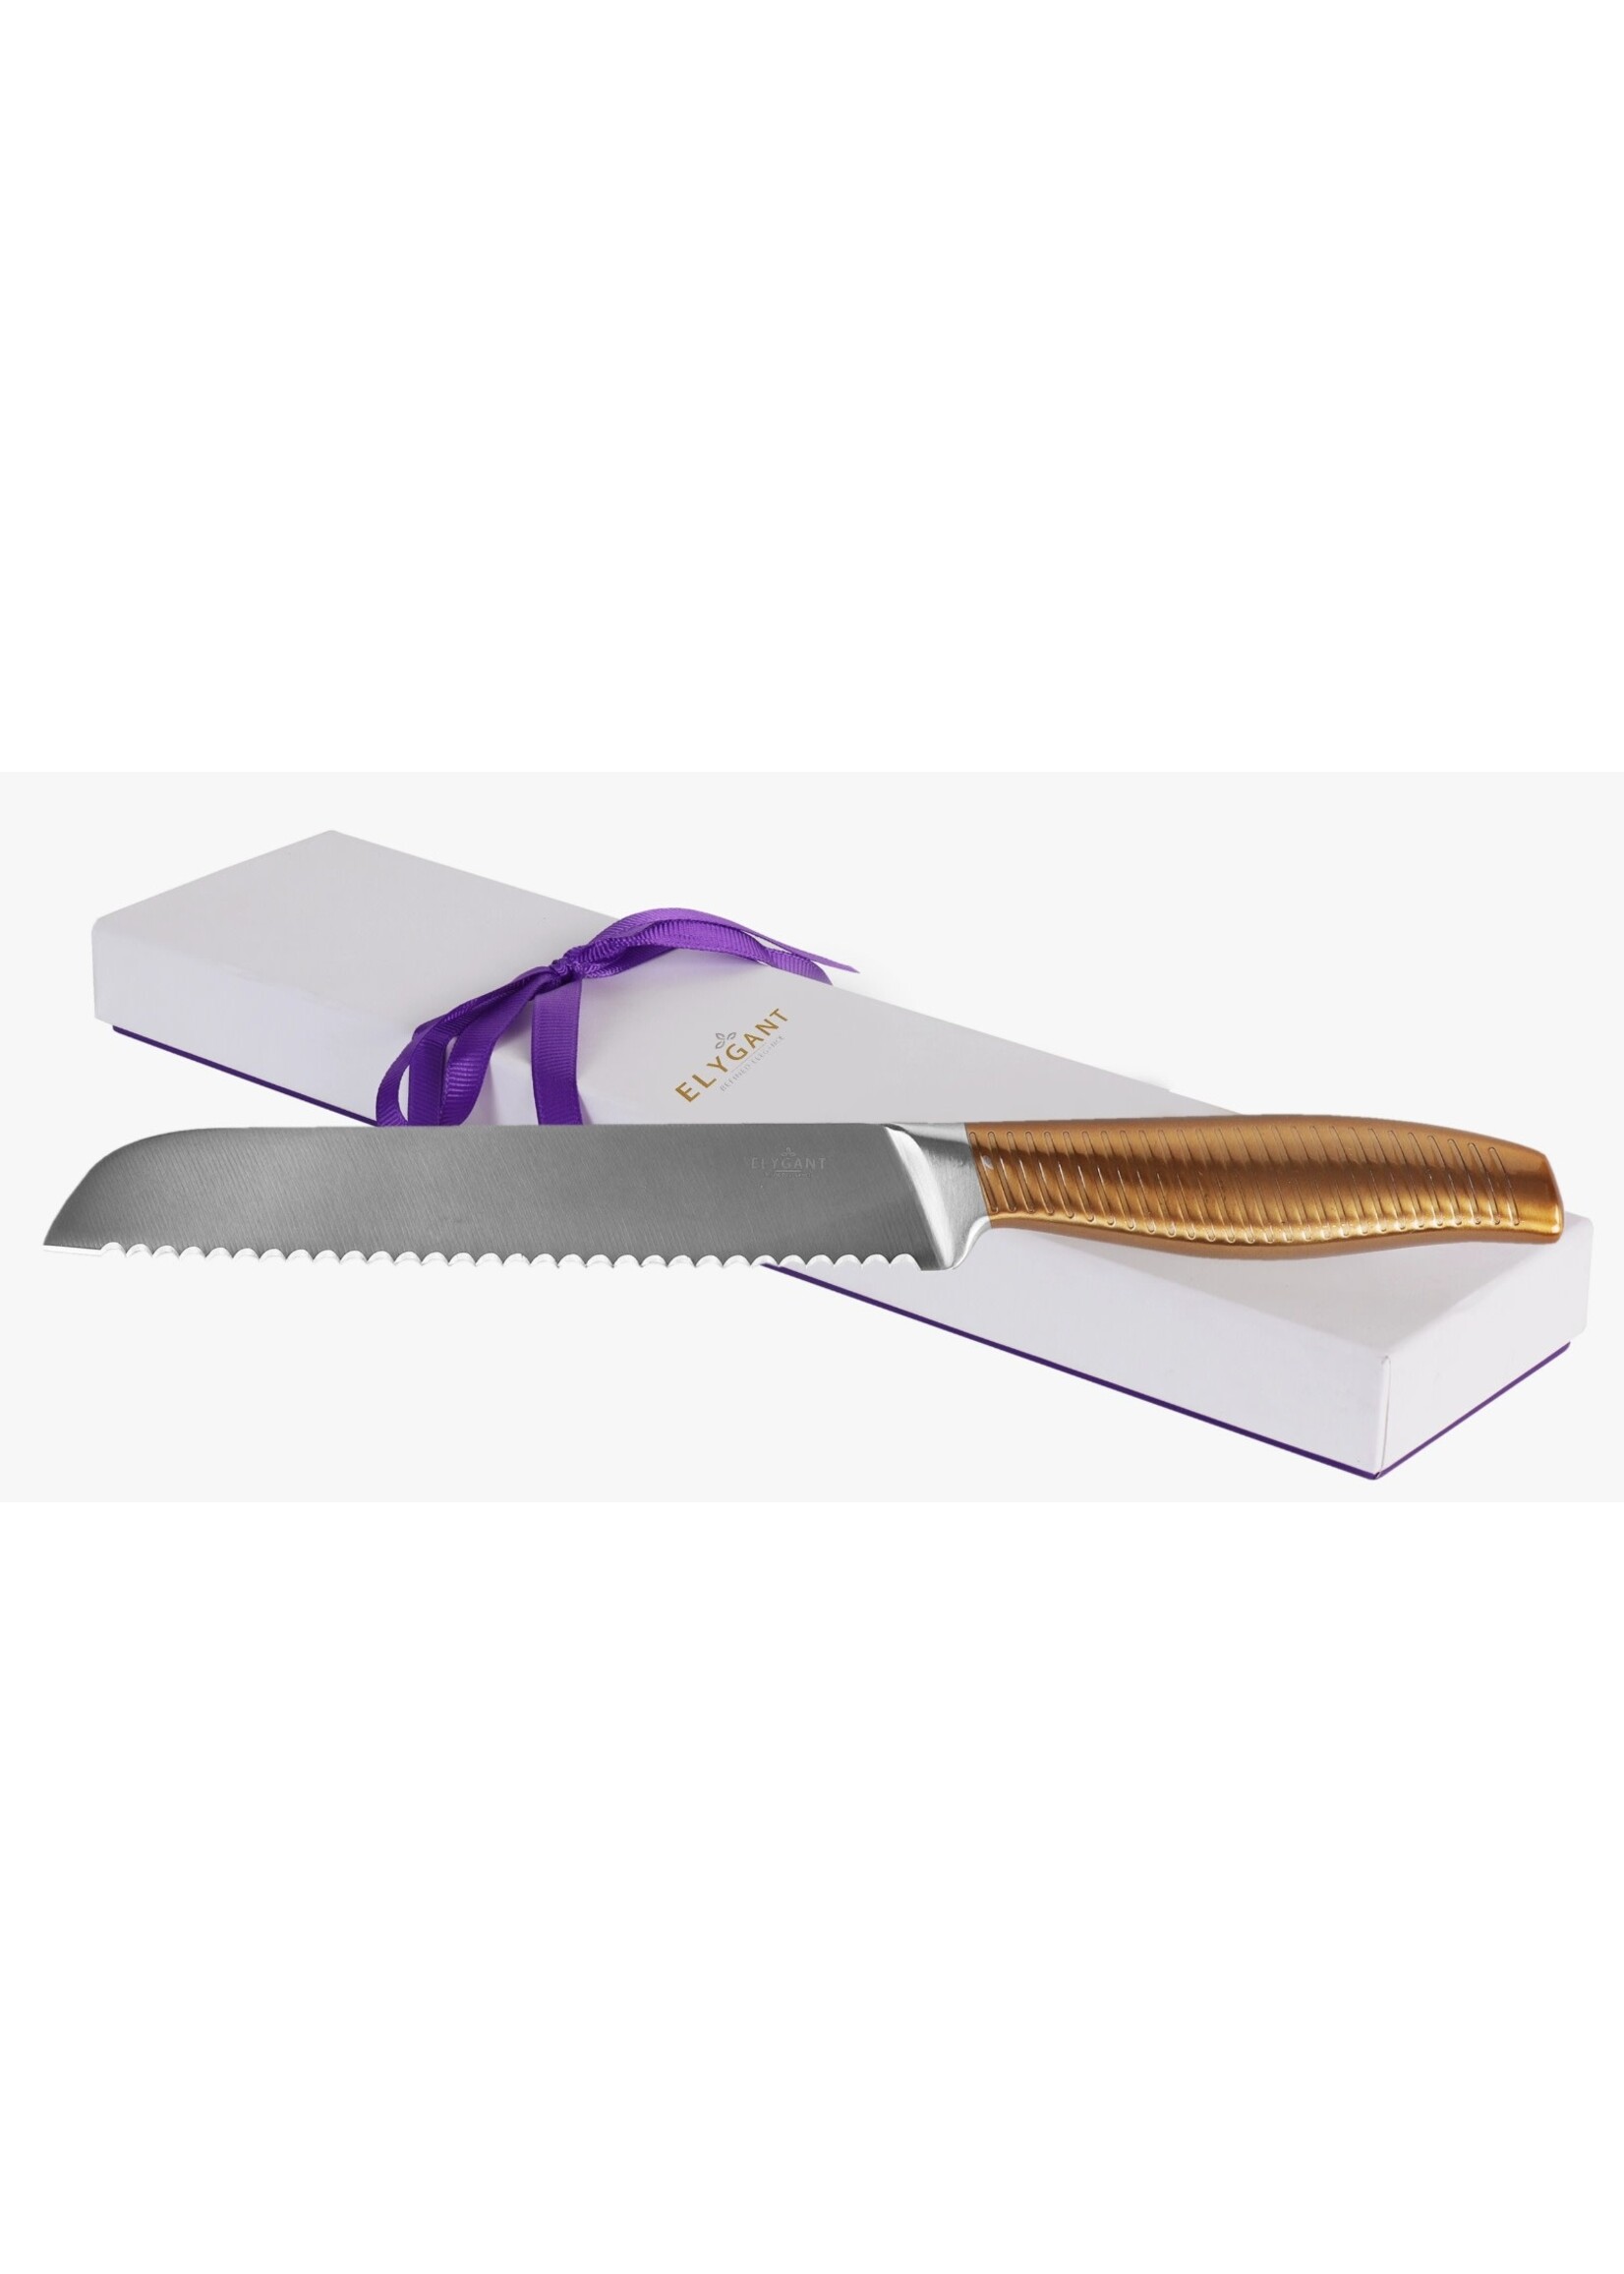 CHALLA KNIFE SWIWVEL STRIPED STAINLESS STEEL GOLD HANDLE